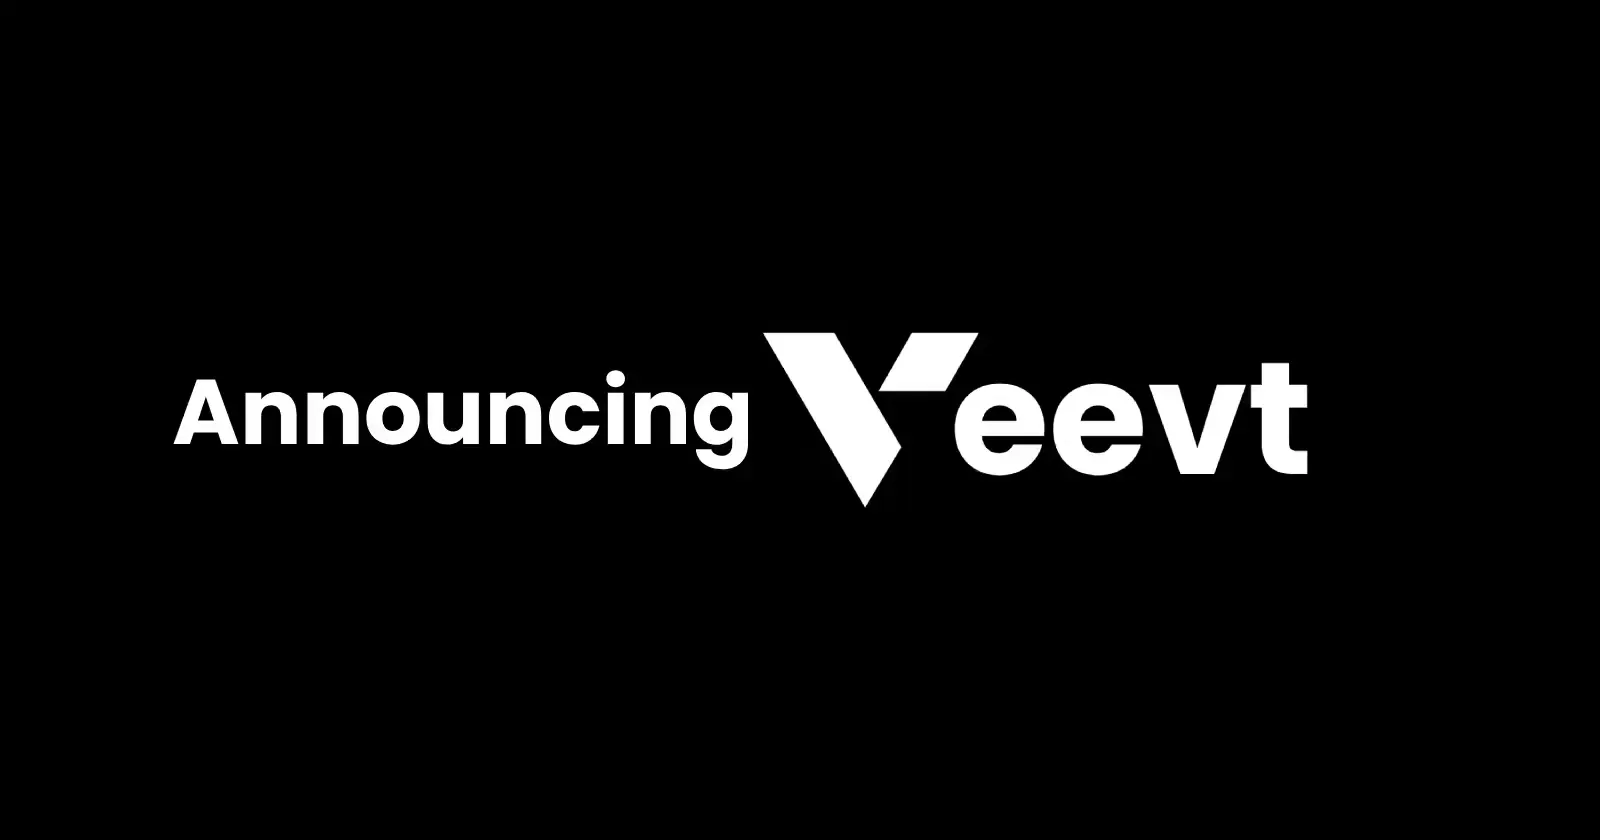 Announcing Veevt